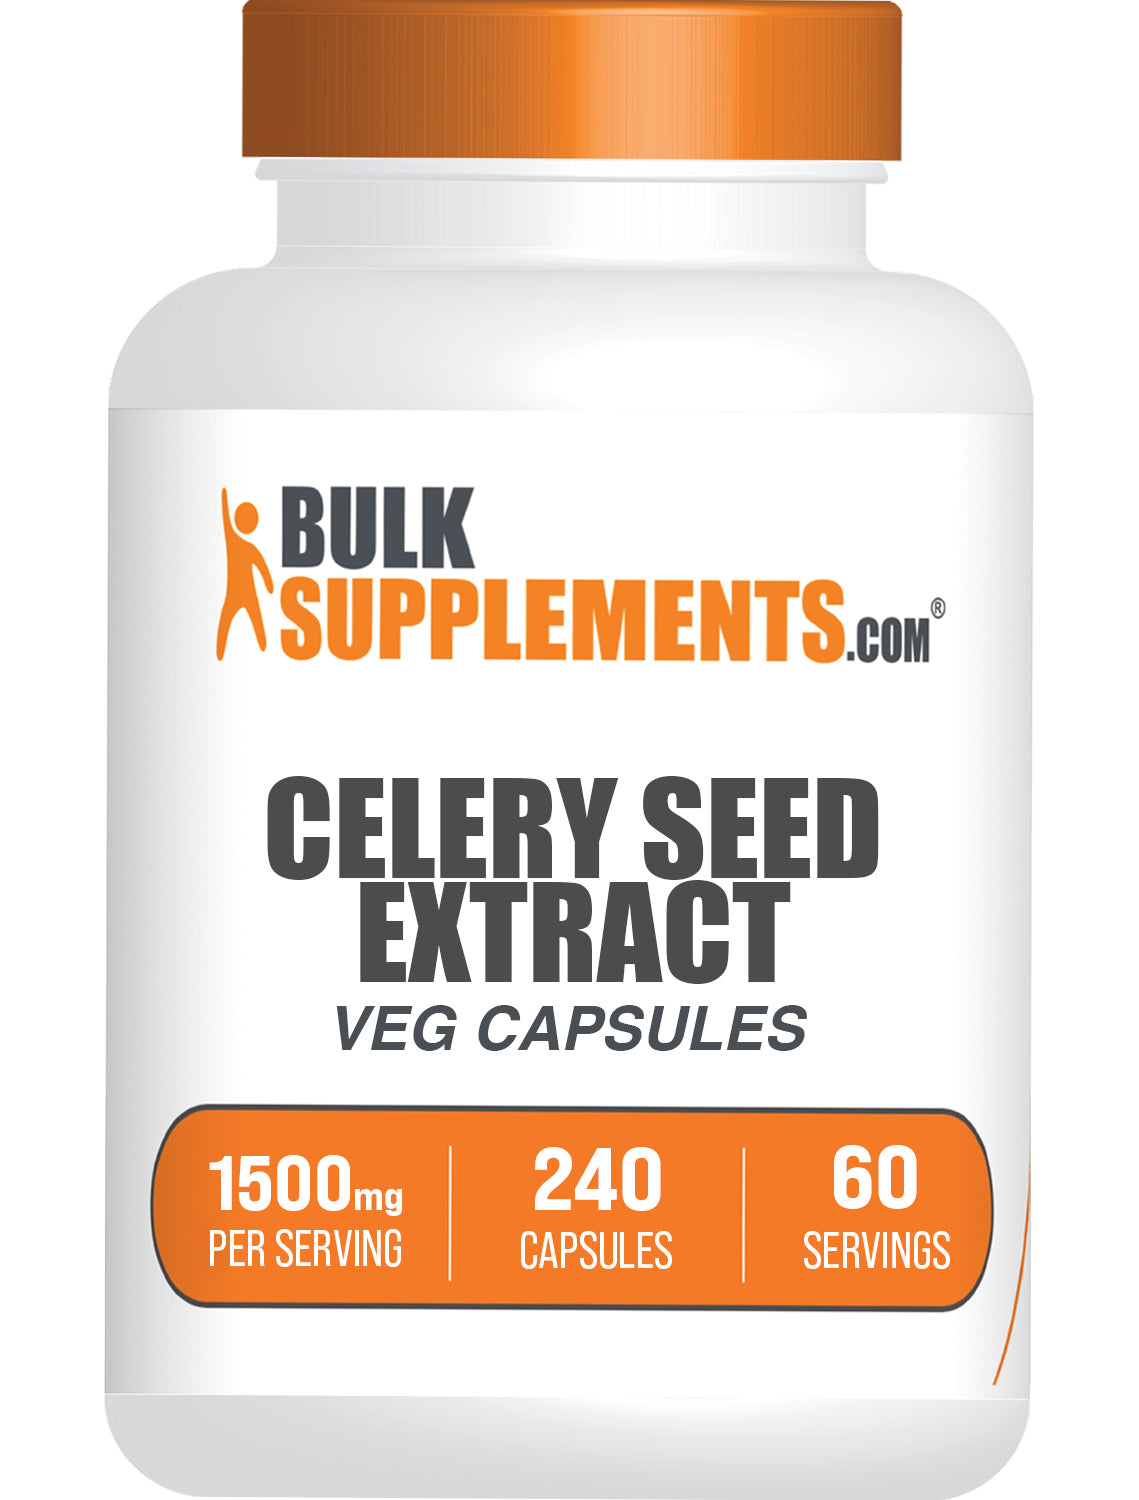 BulkSupplements Celery Seed Extract Capsules 1500mg 240 capsules bottle